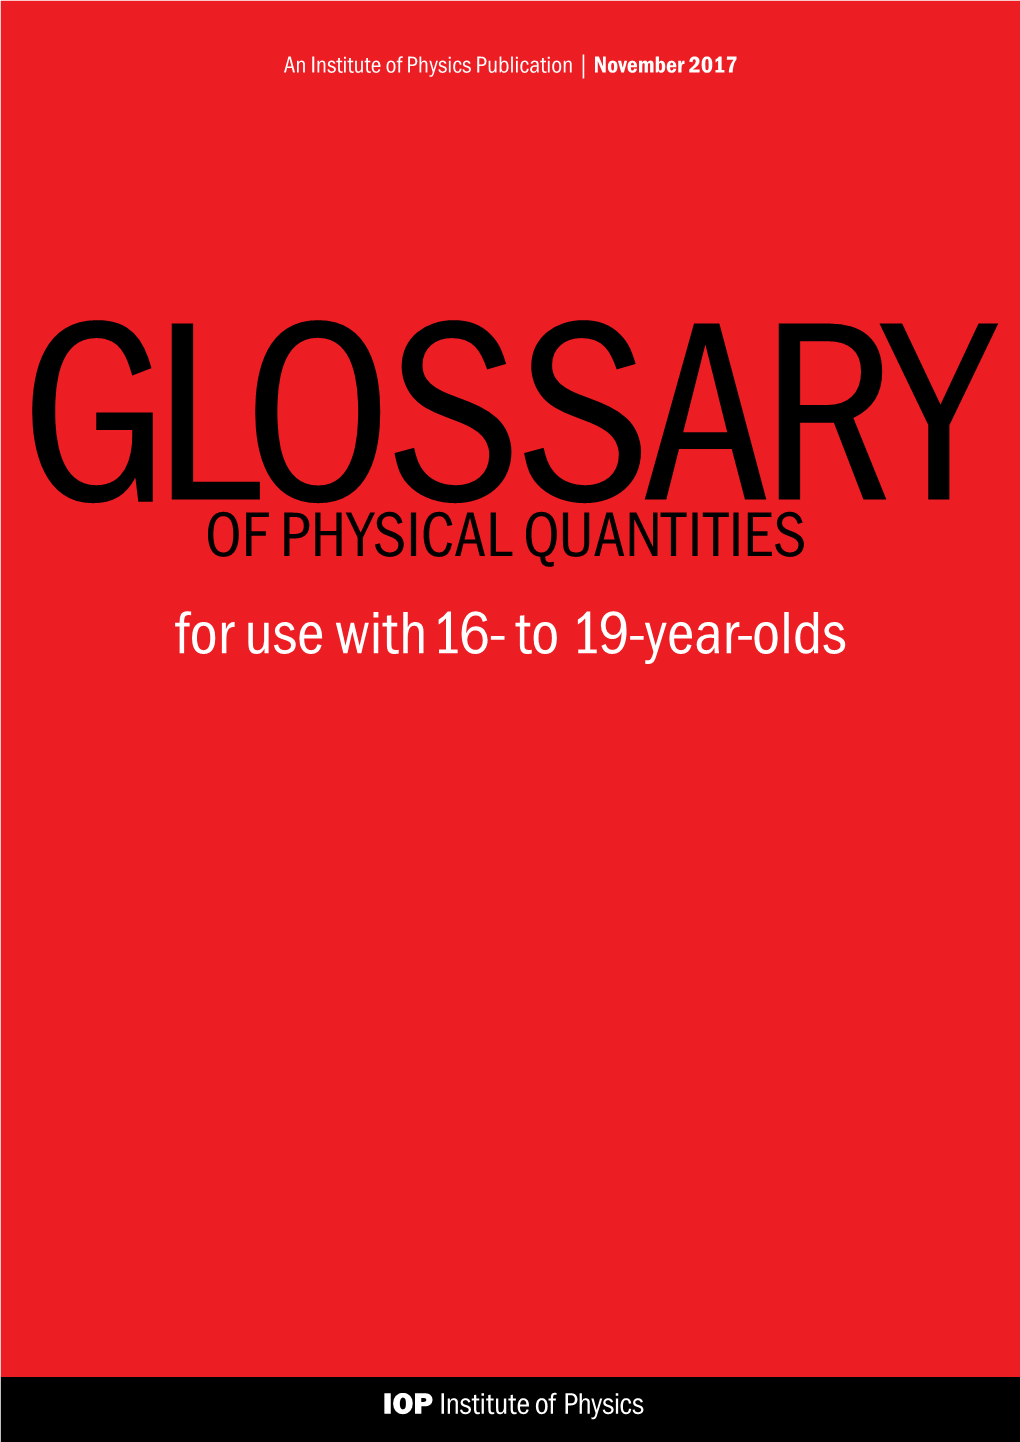 IOP-NPL Glossary of Physical Quantities